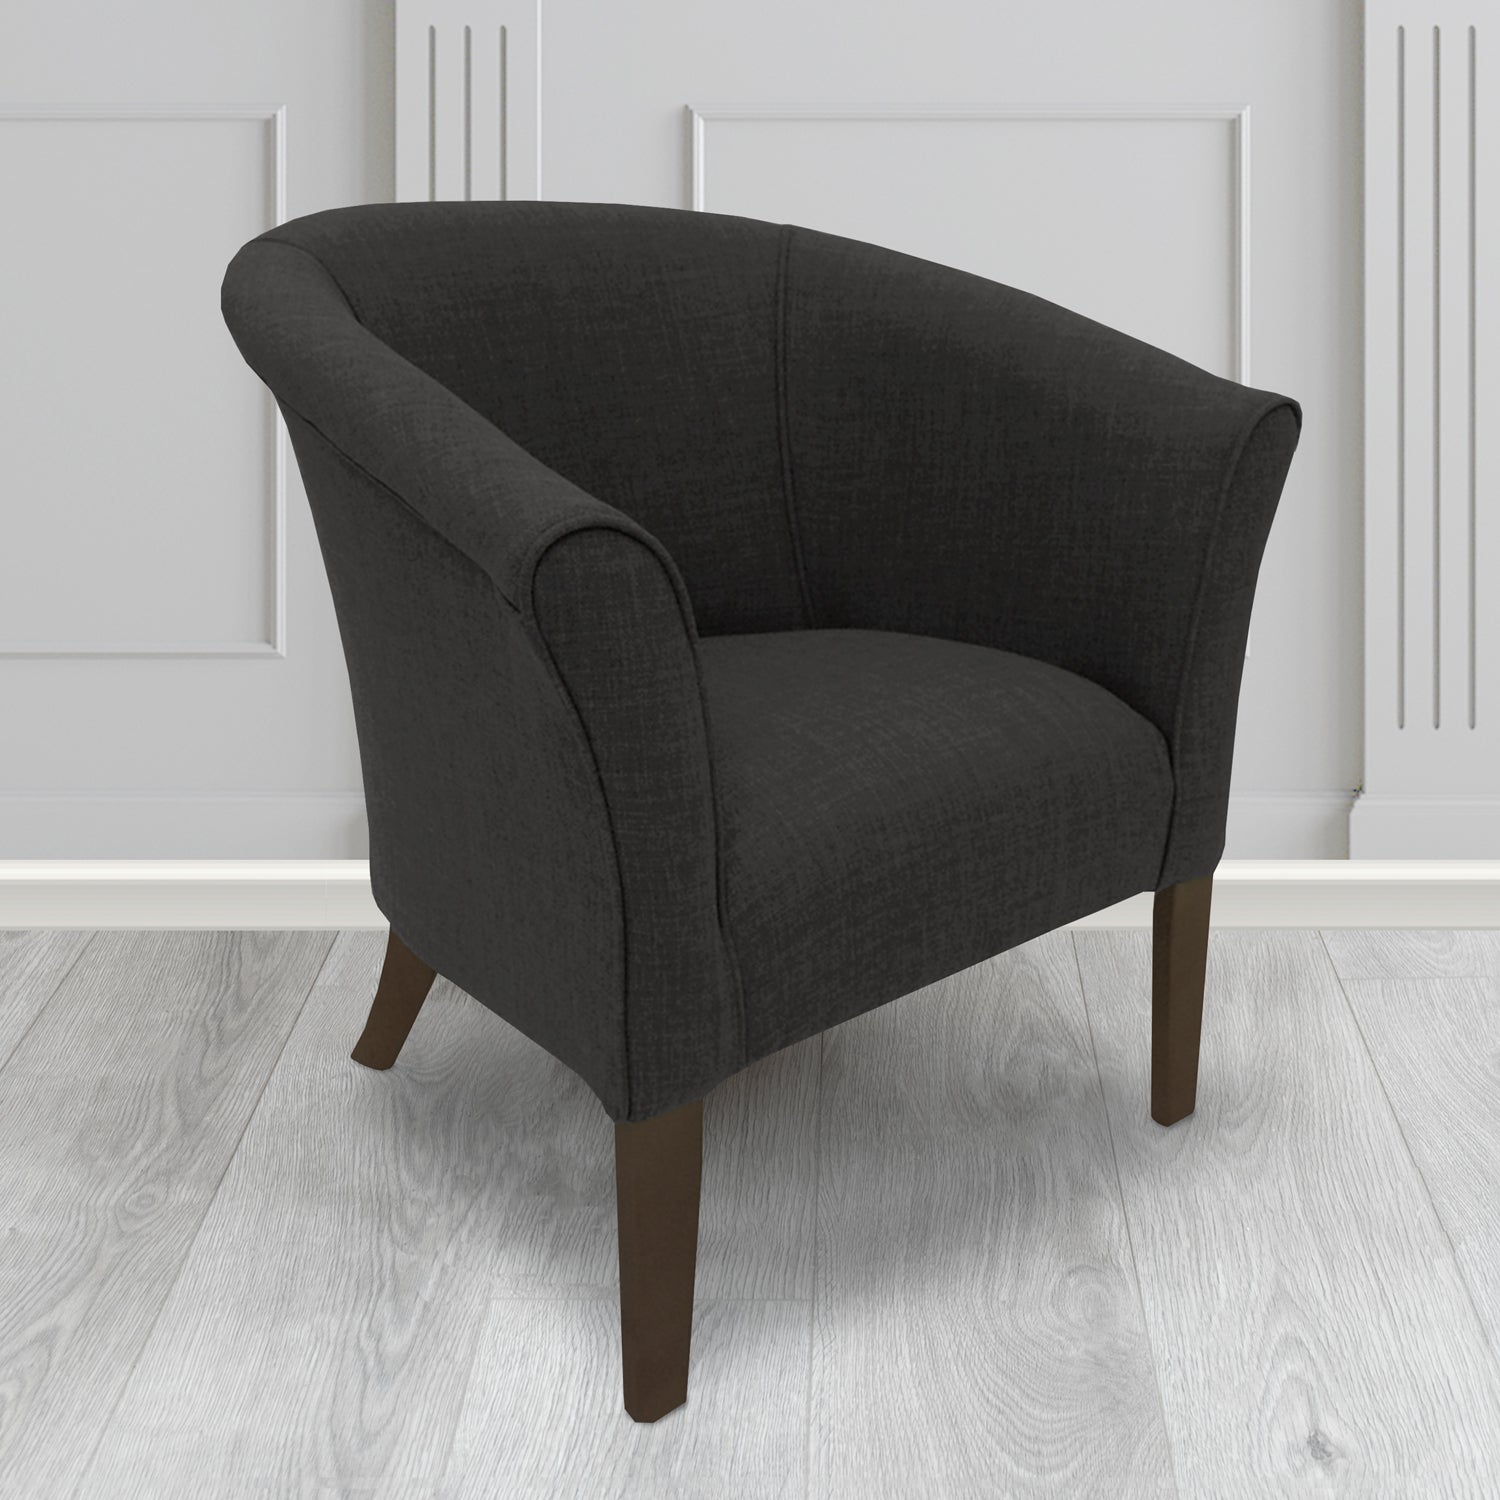 Quill Tub Chair in Linetta Black Crib 5 Plain Fabric - Antimicrobial, Stain Resistant & Waterproof - The Tub Chair Shop